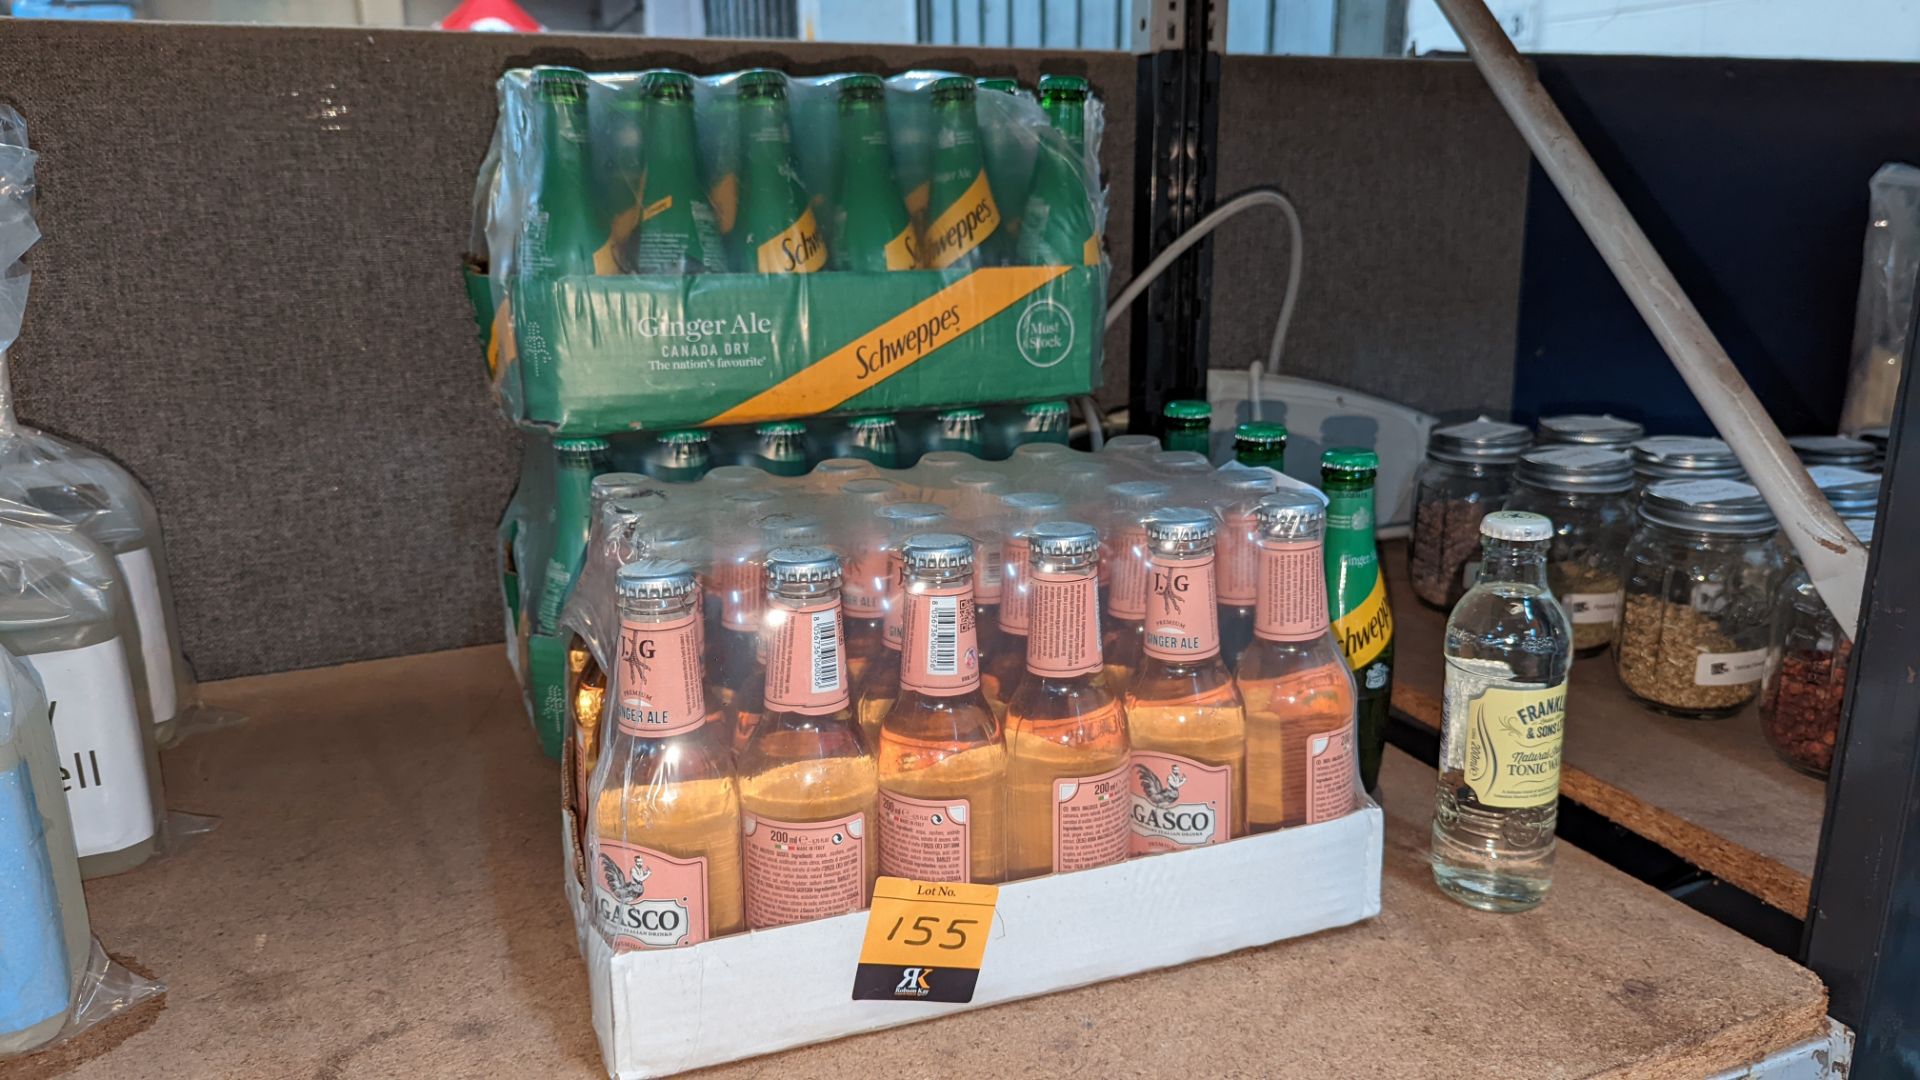 Quantity of mixers comprising one case of Gasco ginger ale, 2 cases of Schweppes ginger ale & 4 asso